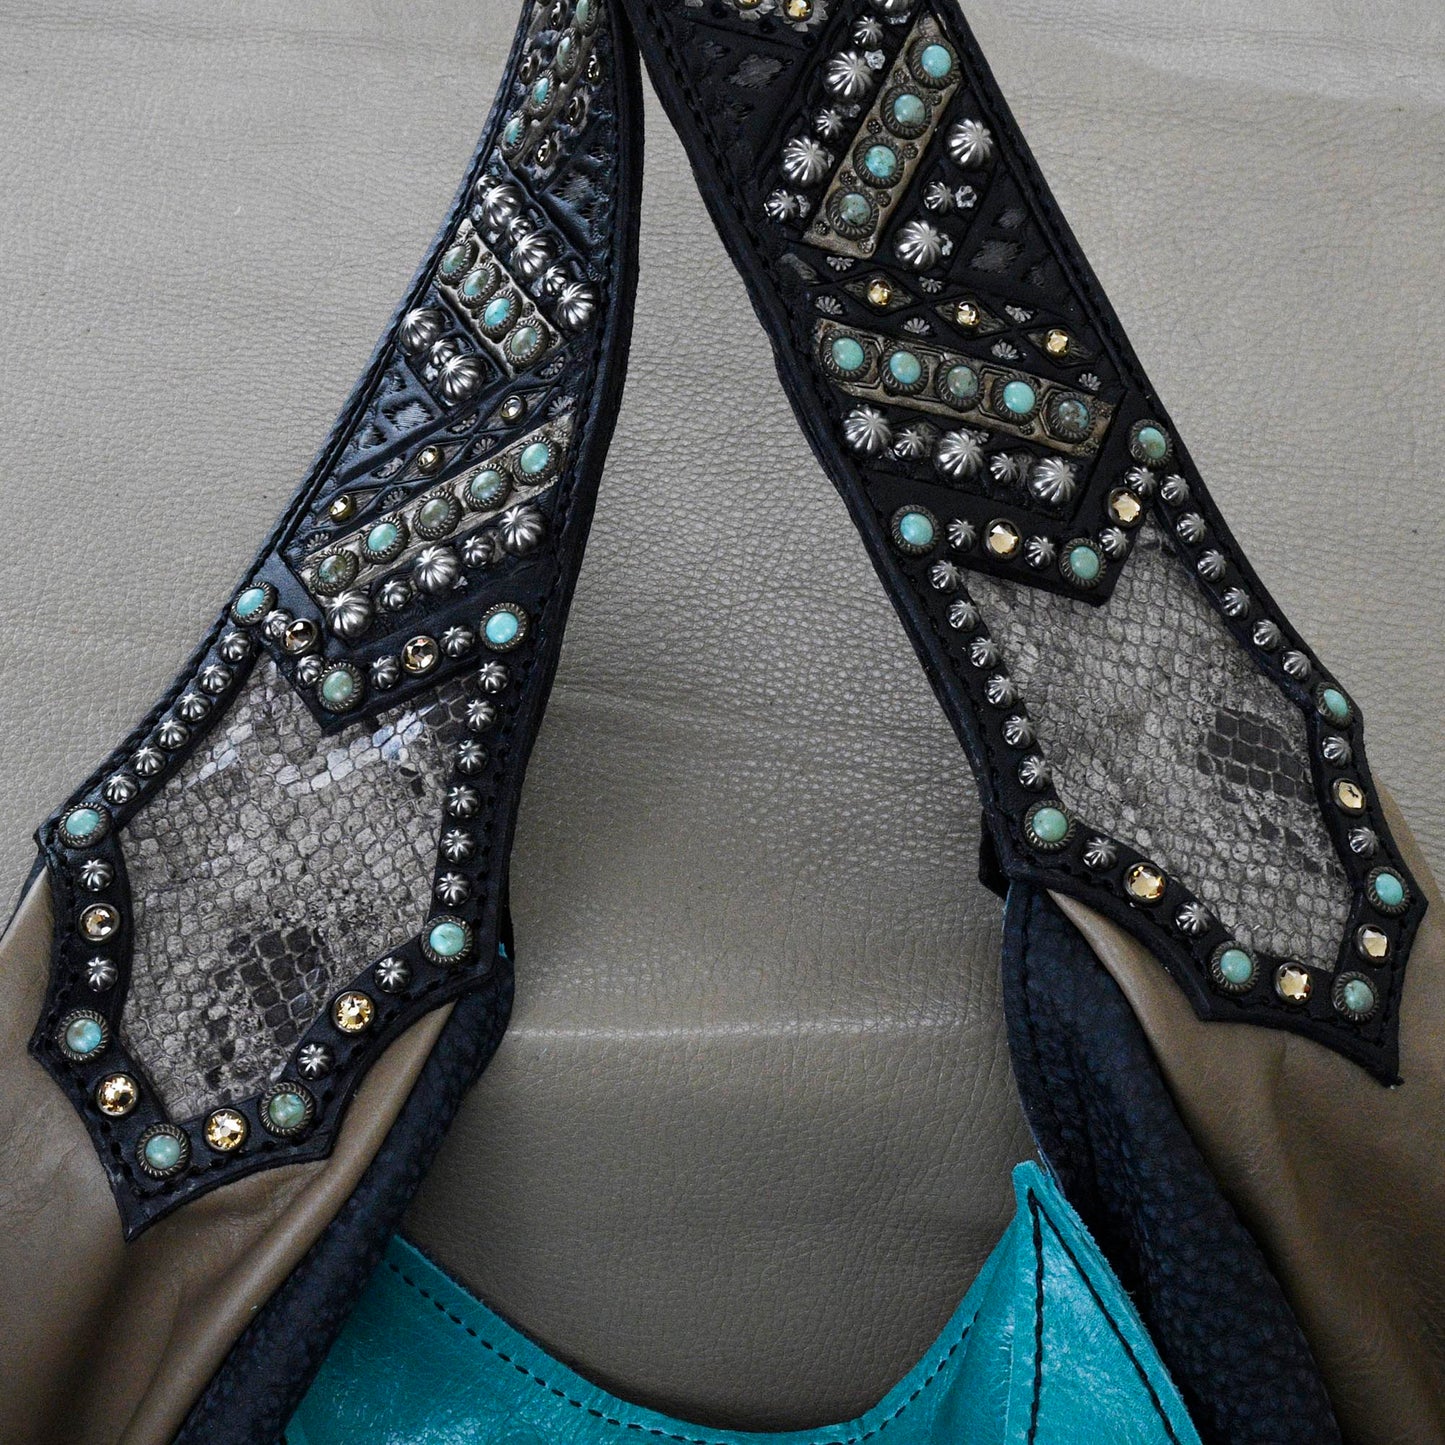 
                  
                    Close-up of Heritage Brand's marilyn bag #1259 in embellished black and turquoise leather with studs and intricate textures.
                  
                